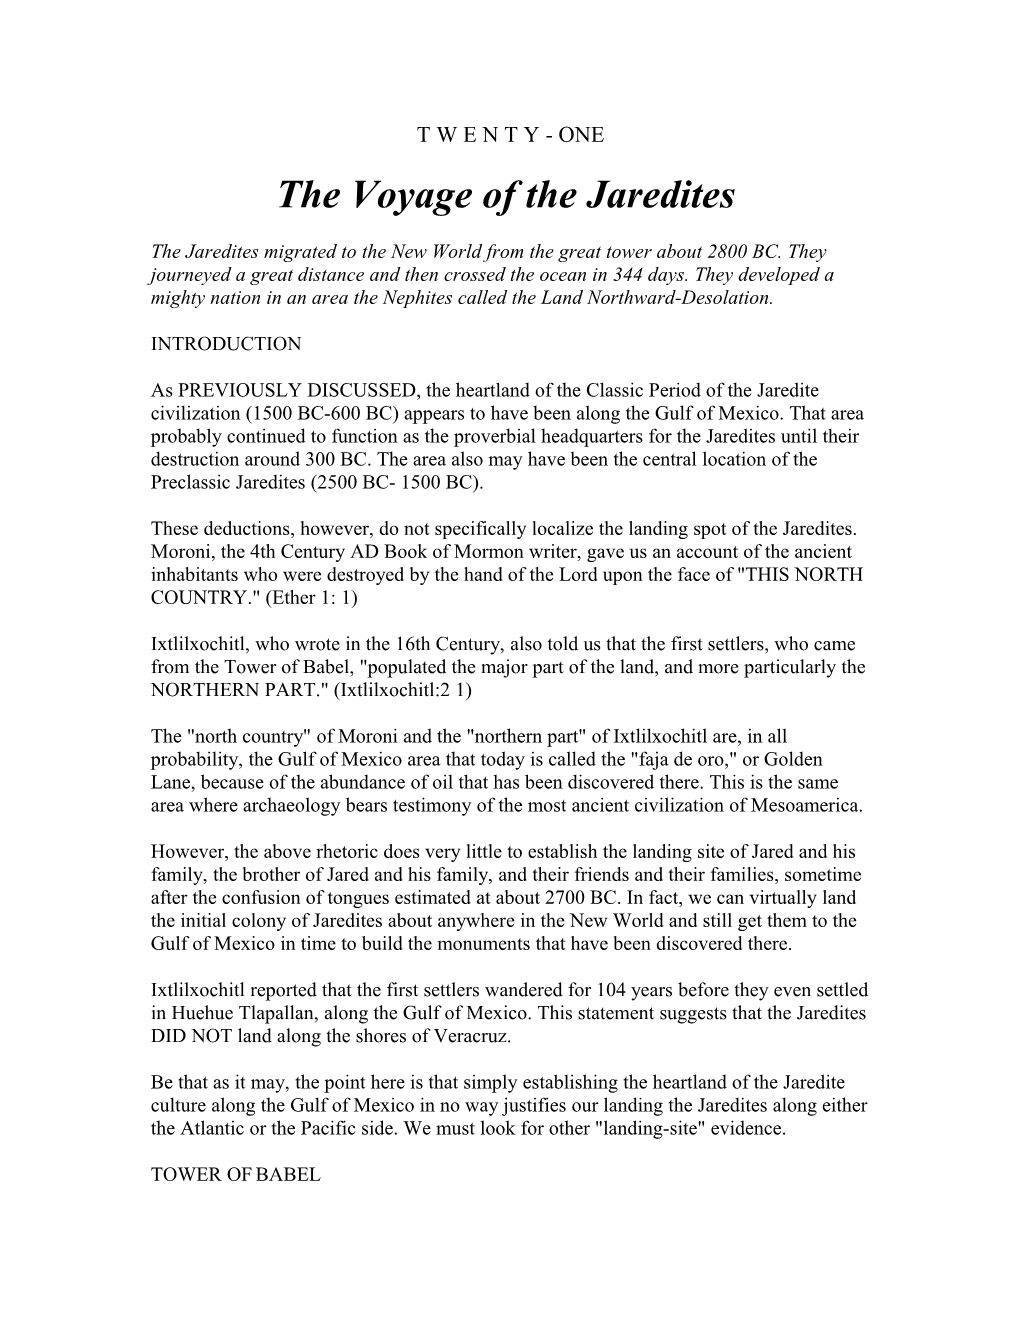 The Voyage of the Jaredites